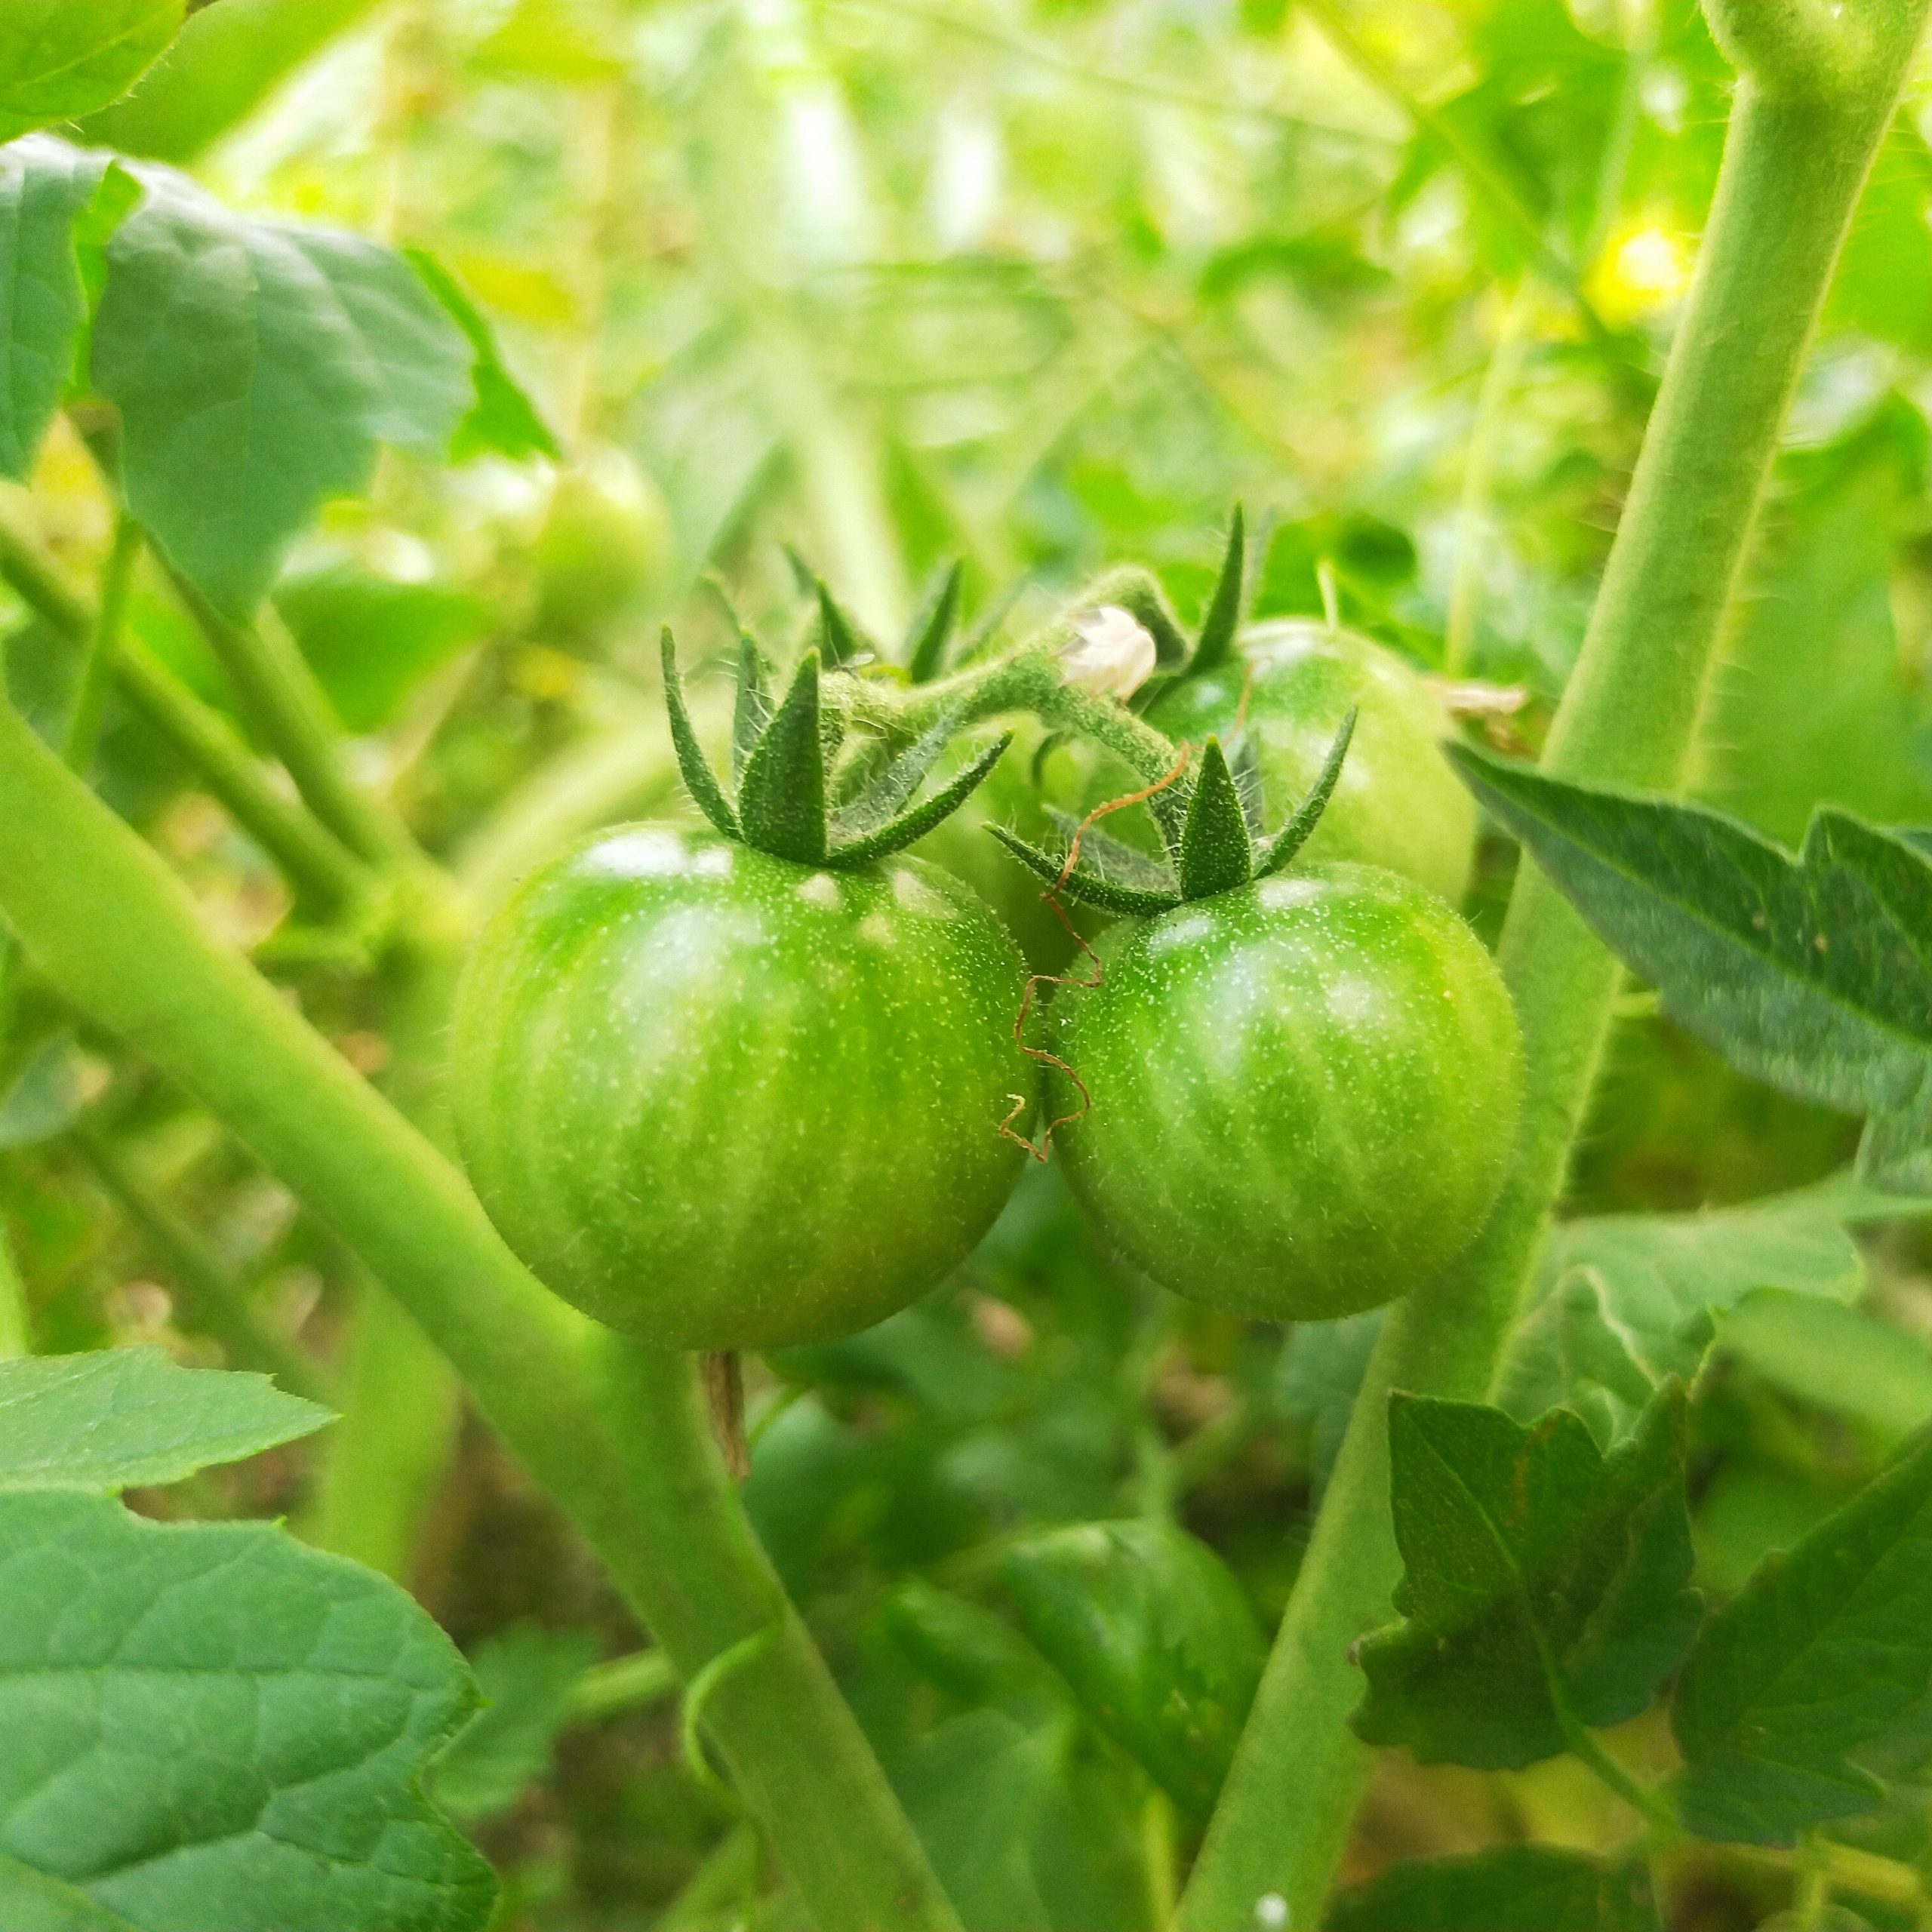 Green tomatoes on a plant